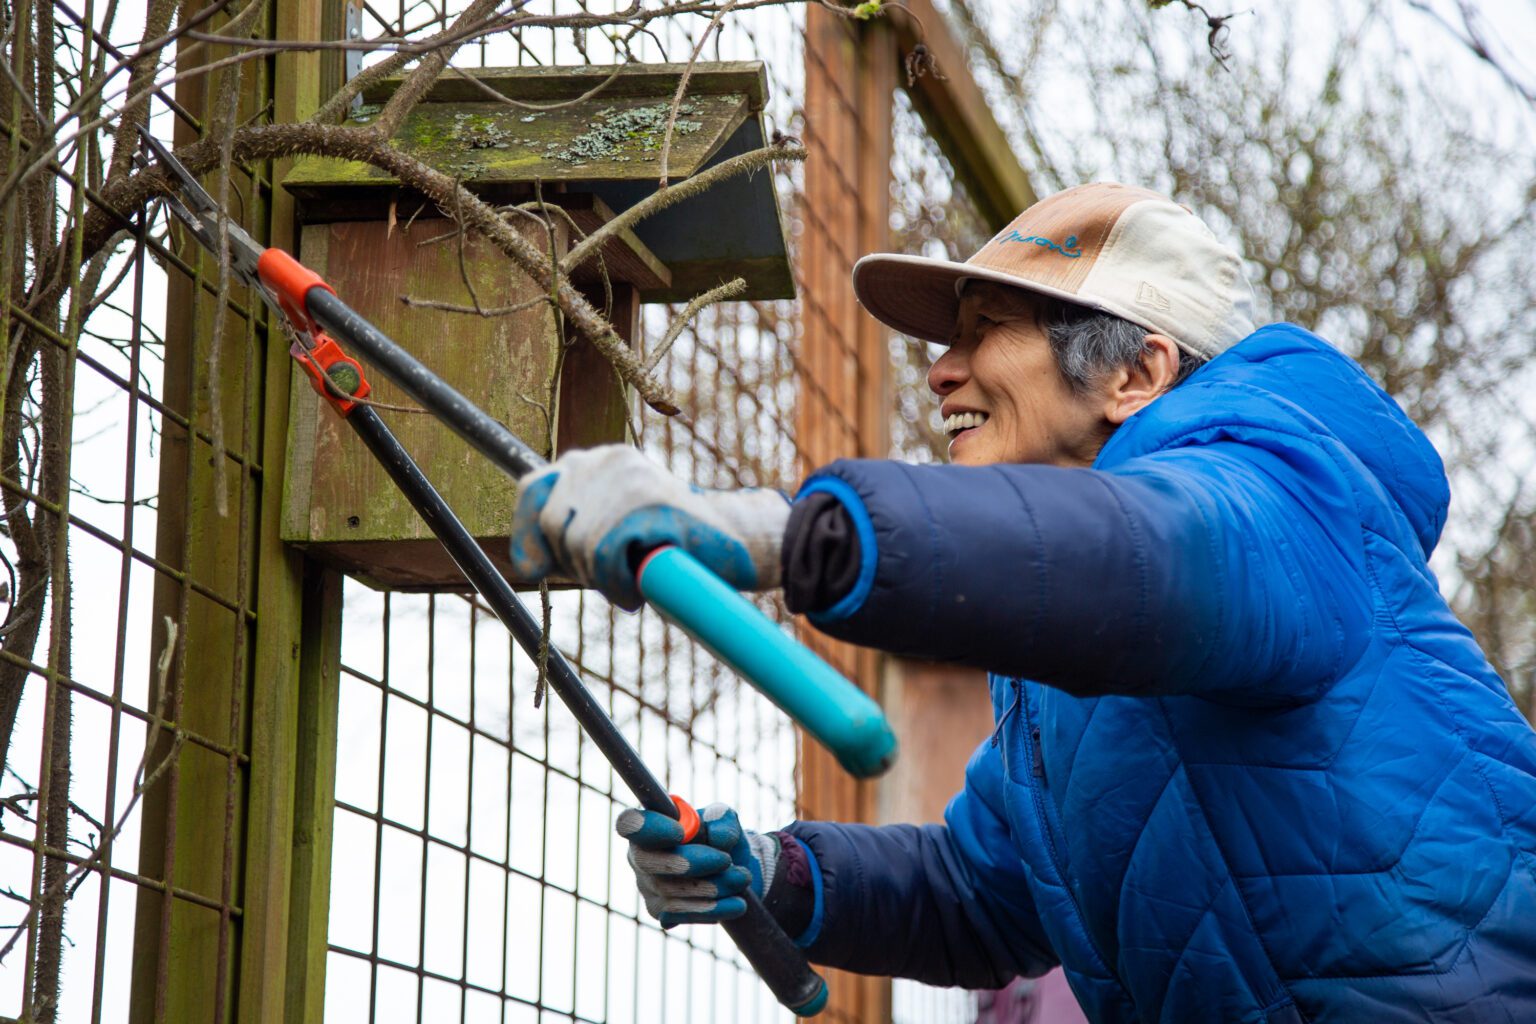 Volunteer Chiao Cheng shears a thick branch that had grown through a fence at the Chuckanut Center on March 12. Cheng and about a dozen other volunteers attended the center's Weed and Feed event.